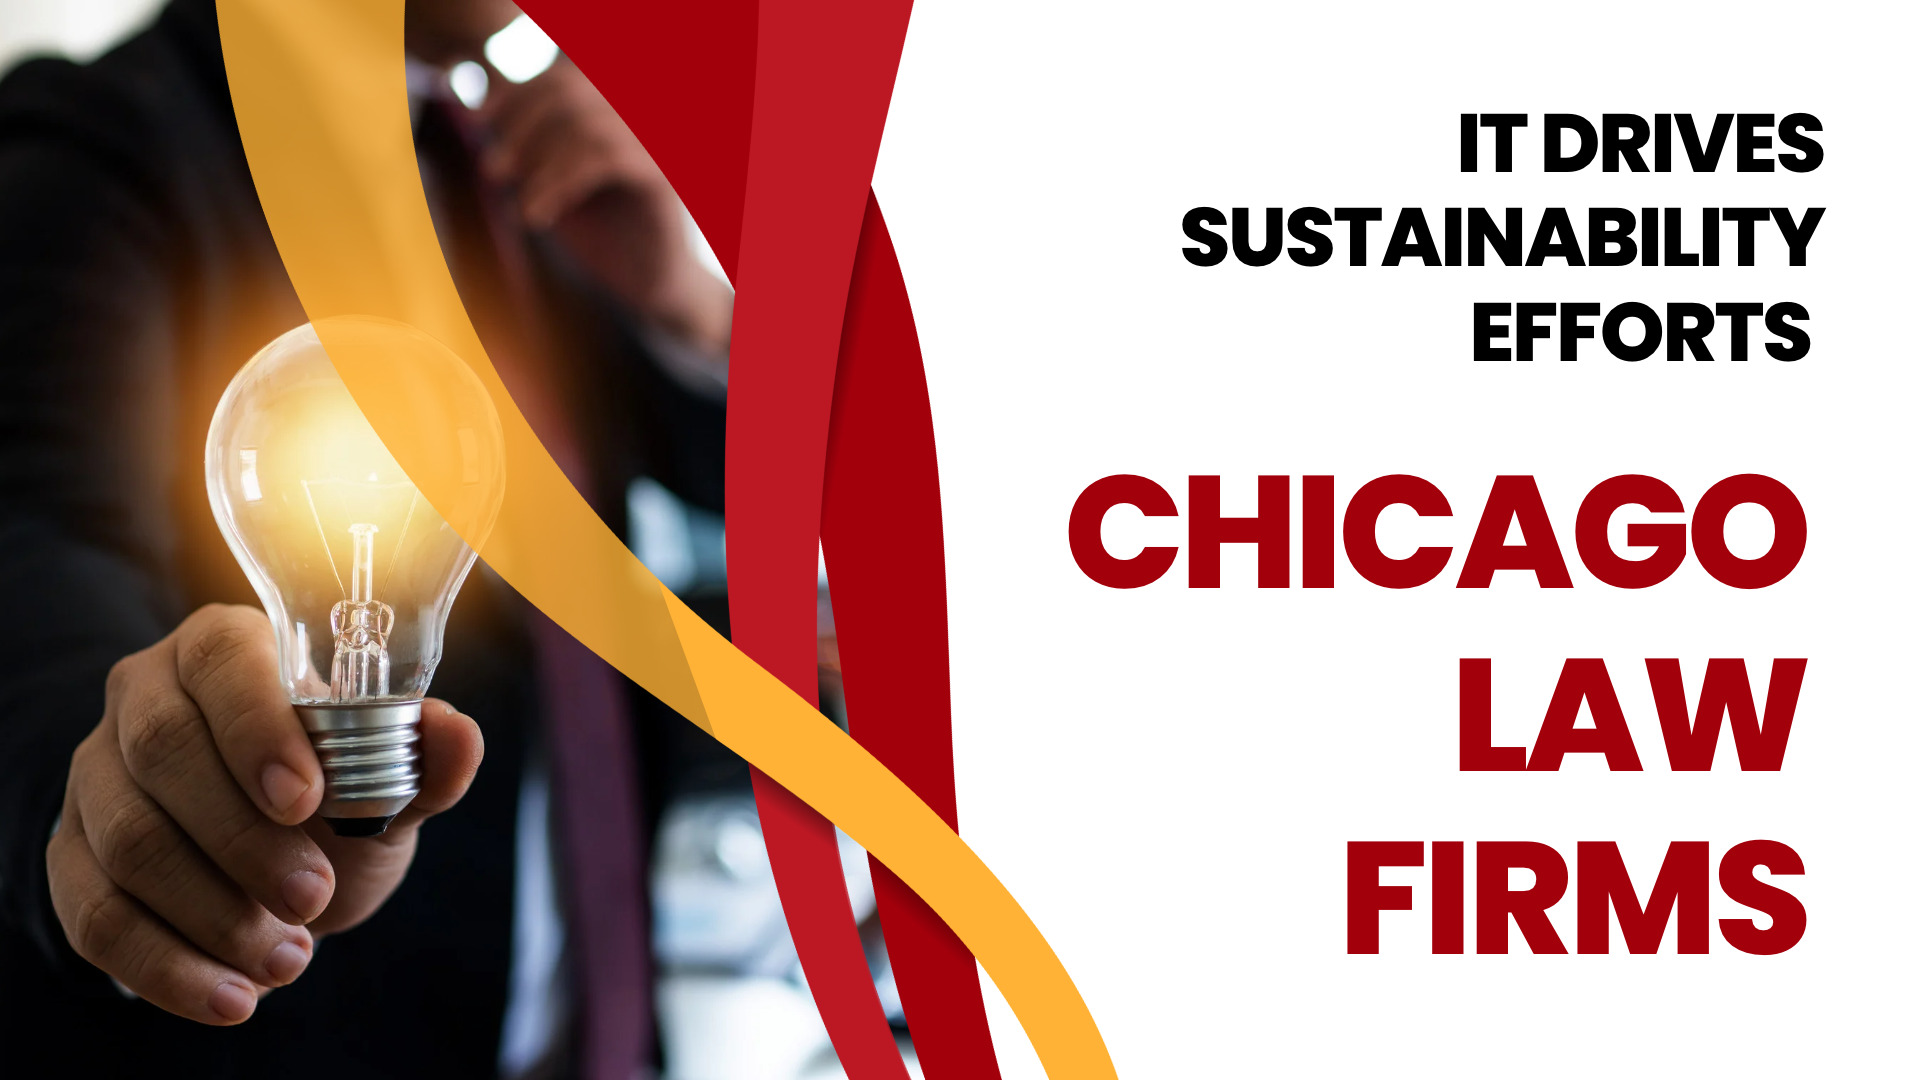 IT Drives Sustainability Efforts for Chicago Law Firms